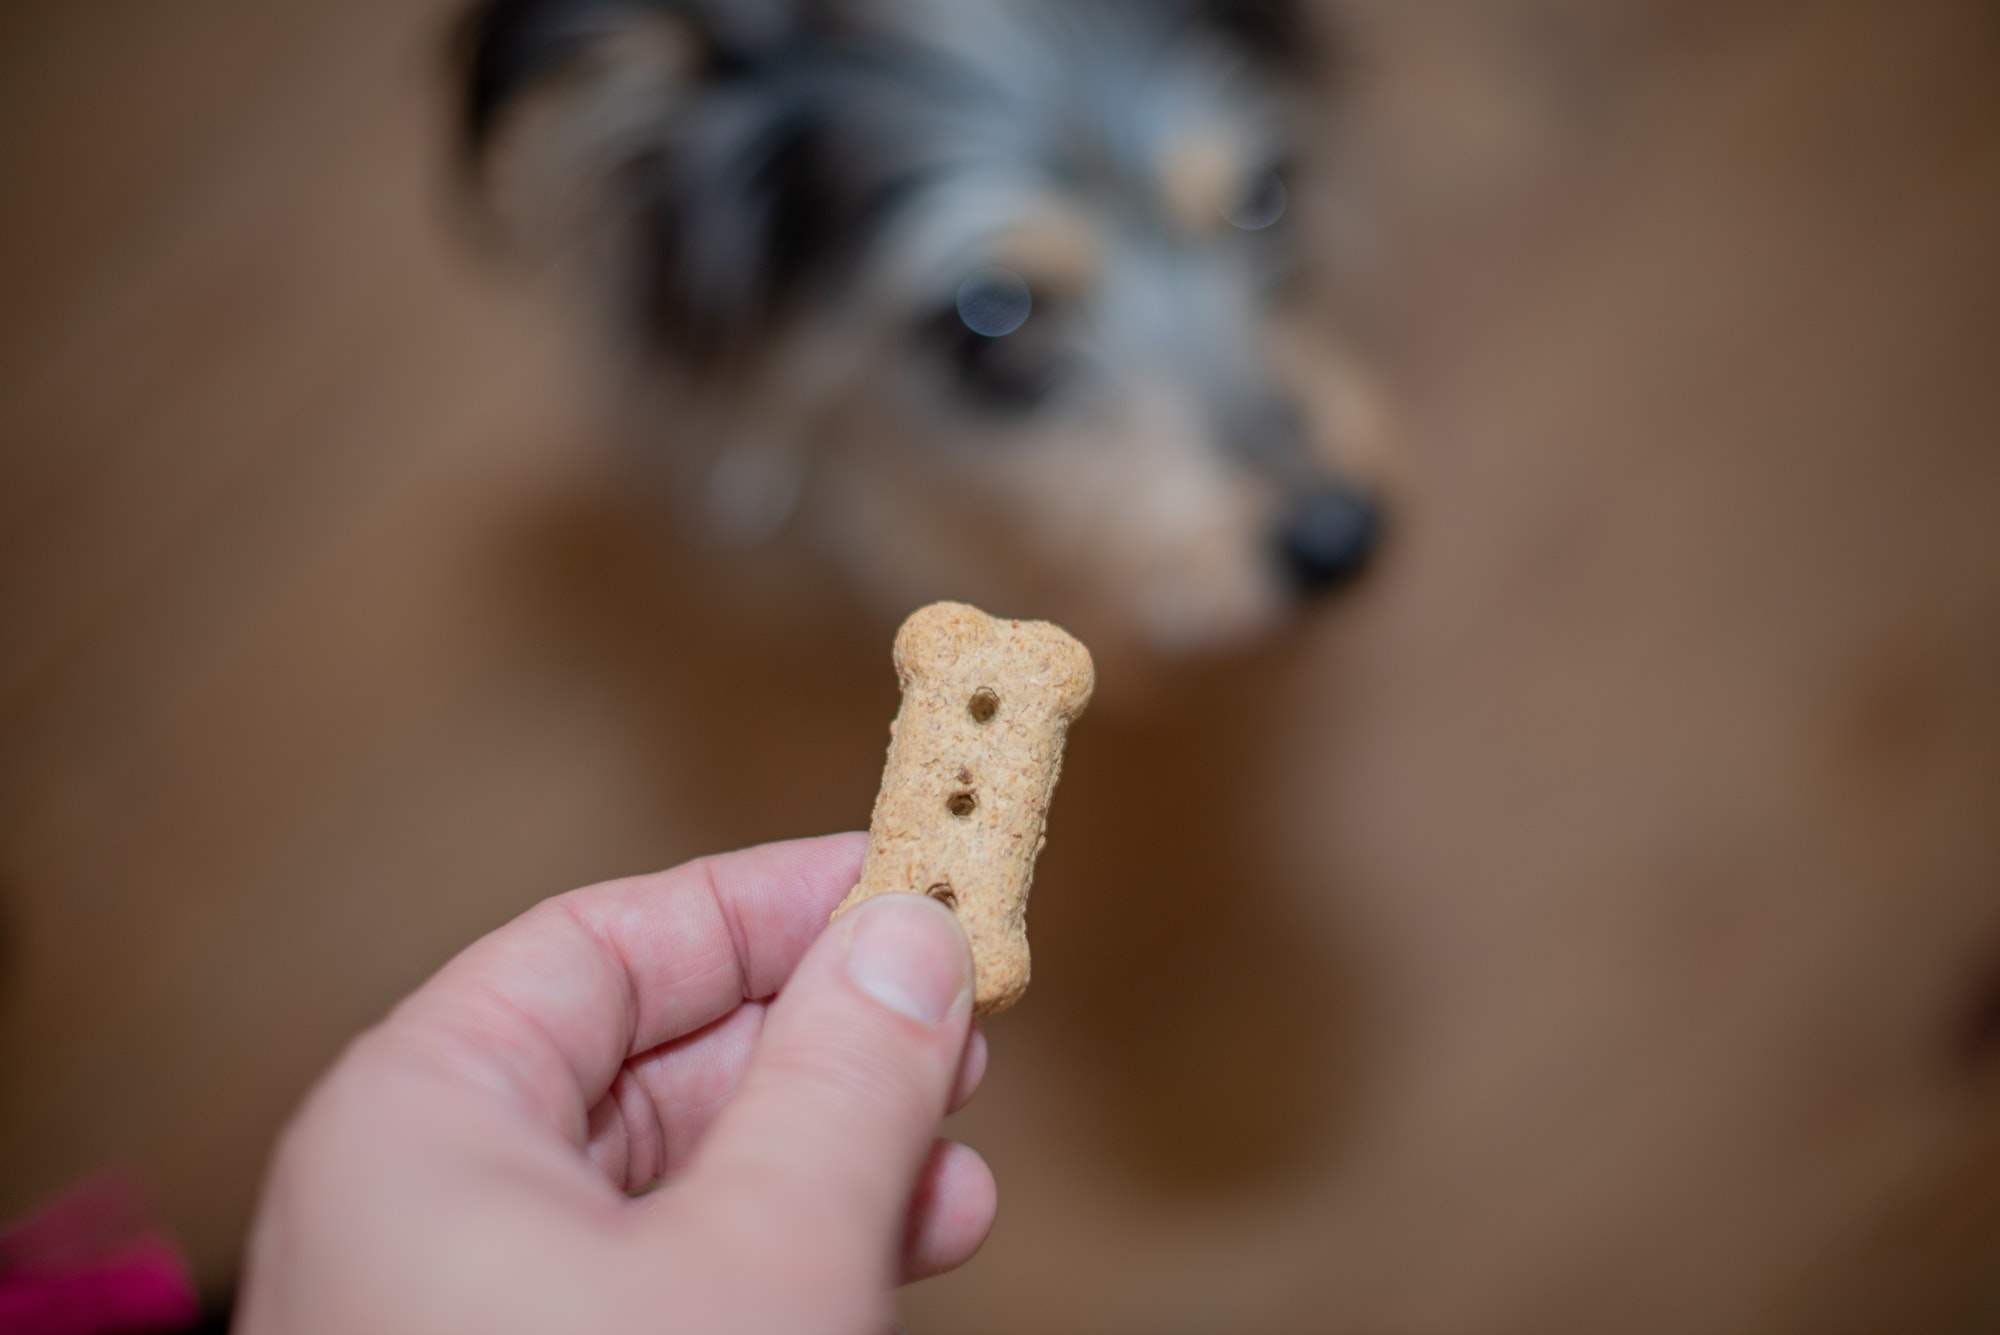 Close up shot of hand holding a treat with blurred image of dog in background